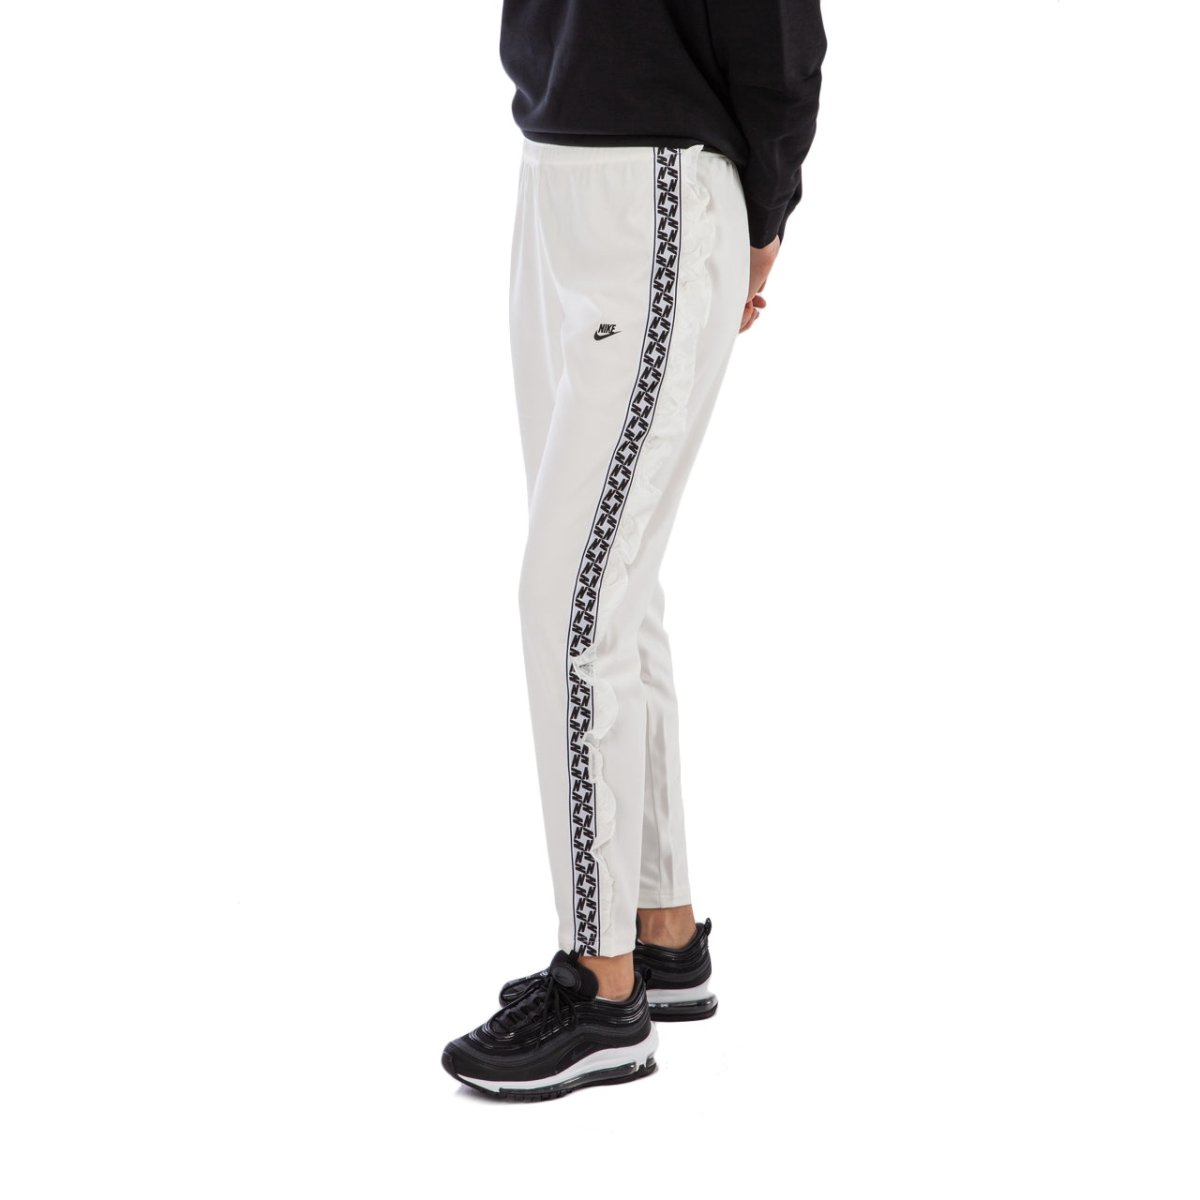 Nike WMNS NSW Taped Poly Pant (Beige)  - Allike Store